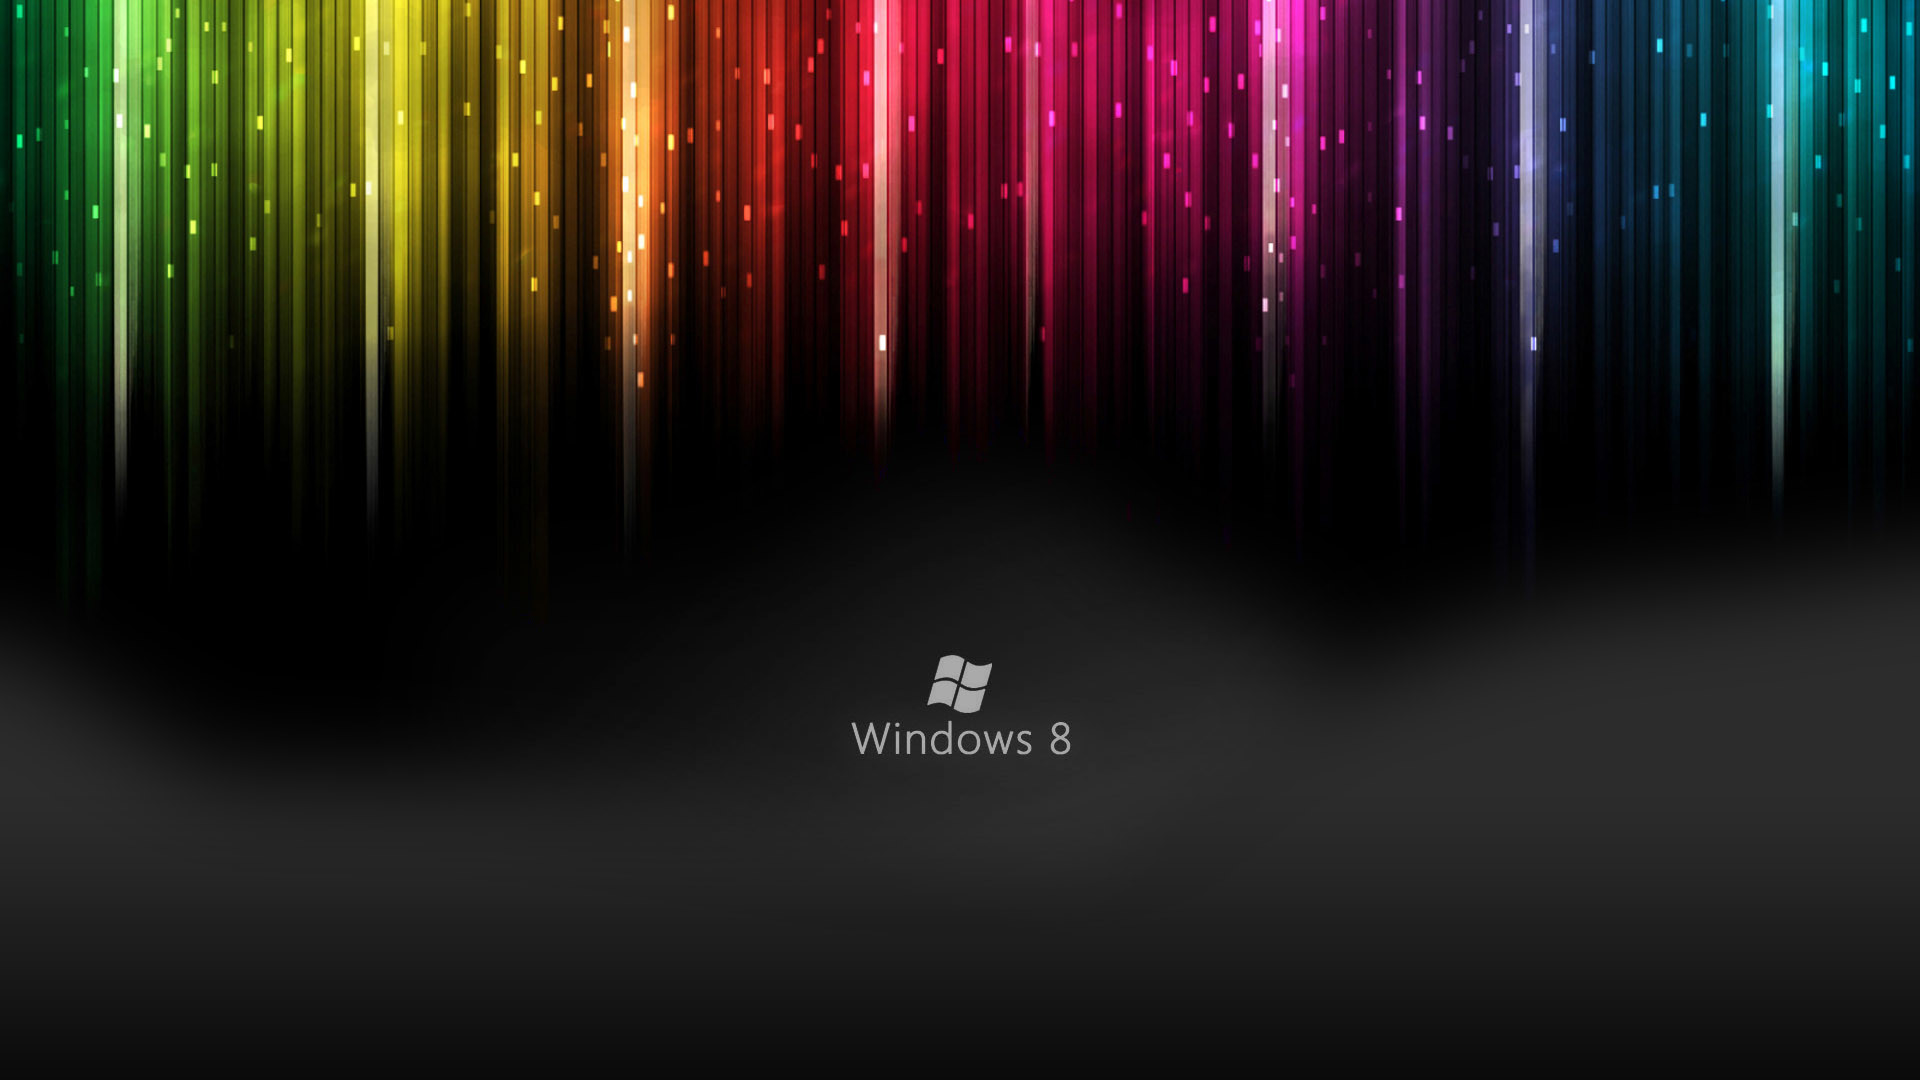 Windows 8 Live Wallpapers HD Wallpapers